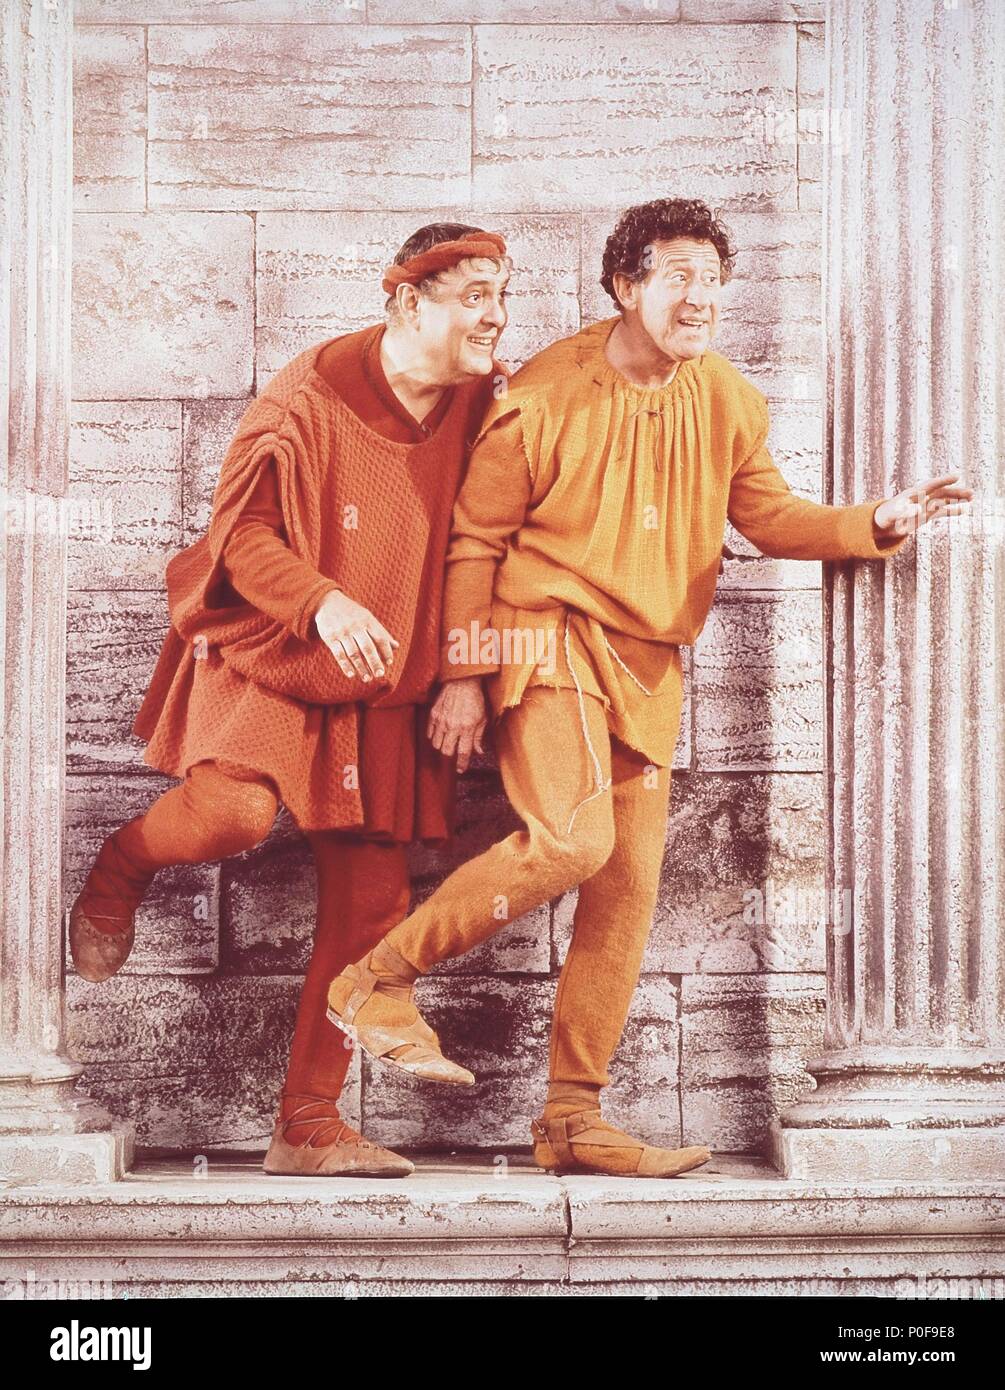 Original Film Title: A FUNNY THING HAPPENED ON THE WAY TO THE FORUM.  English Title: A FUNNY THING HAPPENED ON THE WAY TO THE FORUM. Film  Director: RICHARD LESTER. Year: 1966. Stars: